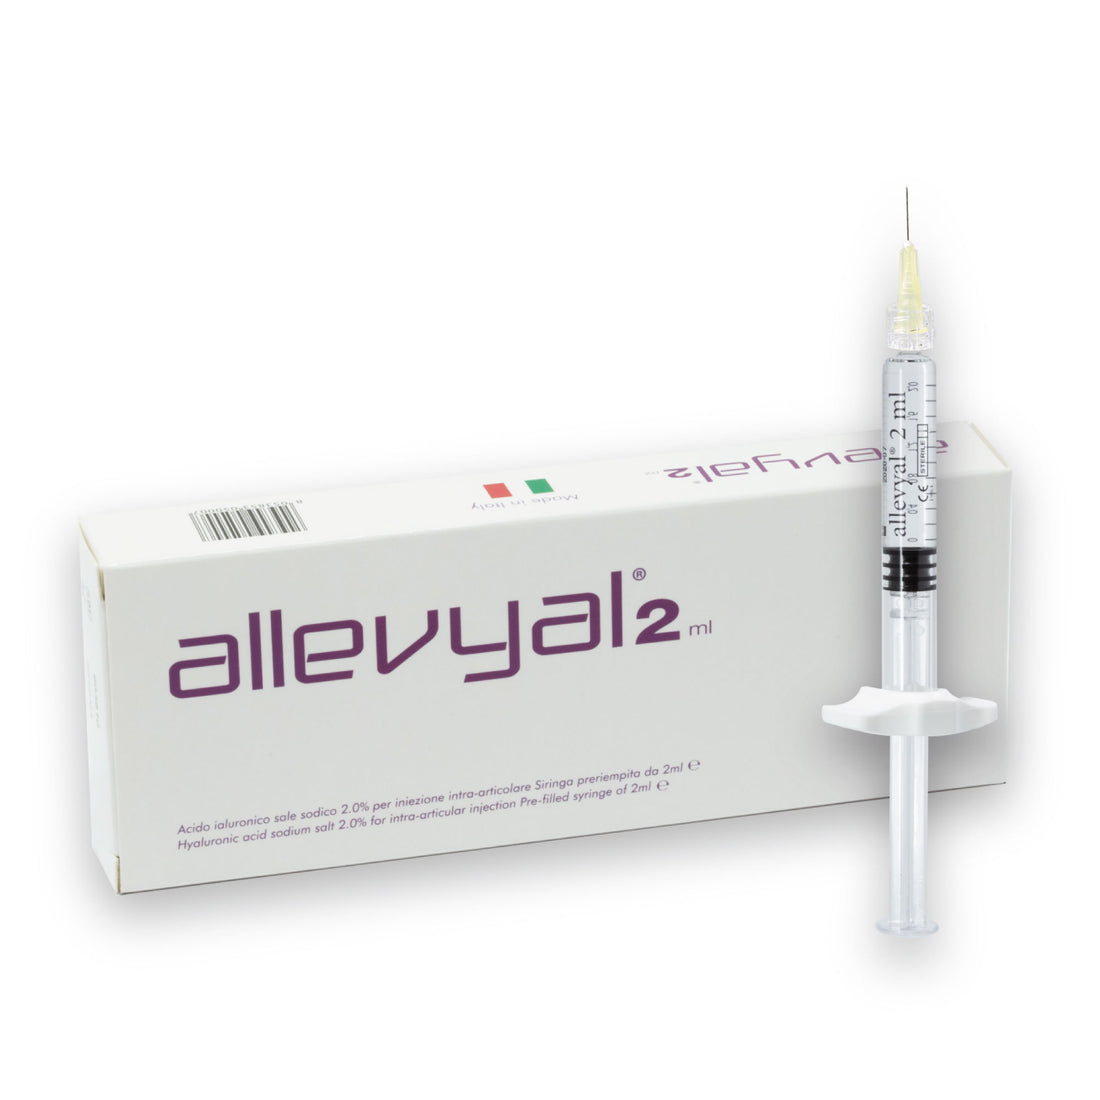 ALLEVYAL 2 ML - Hyaluronic Acid with High Viscosity Degree for Joints affected by OA